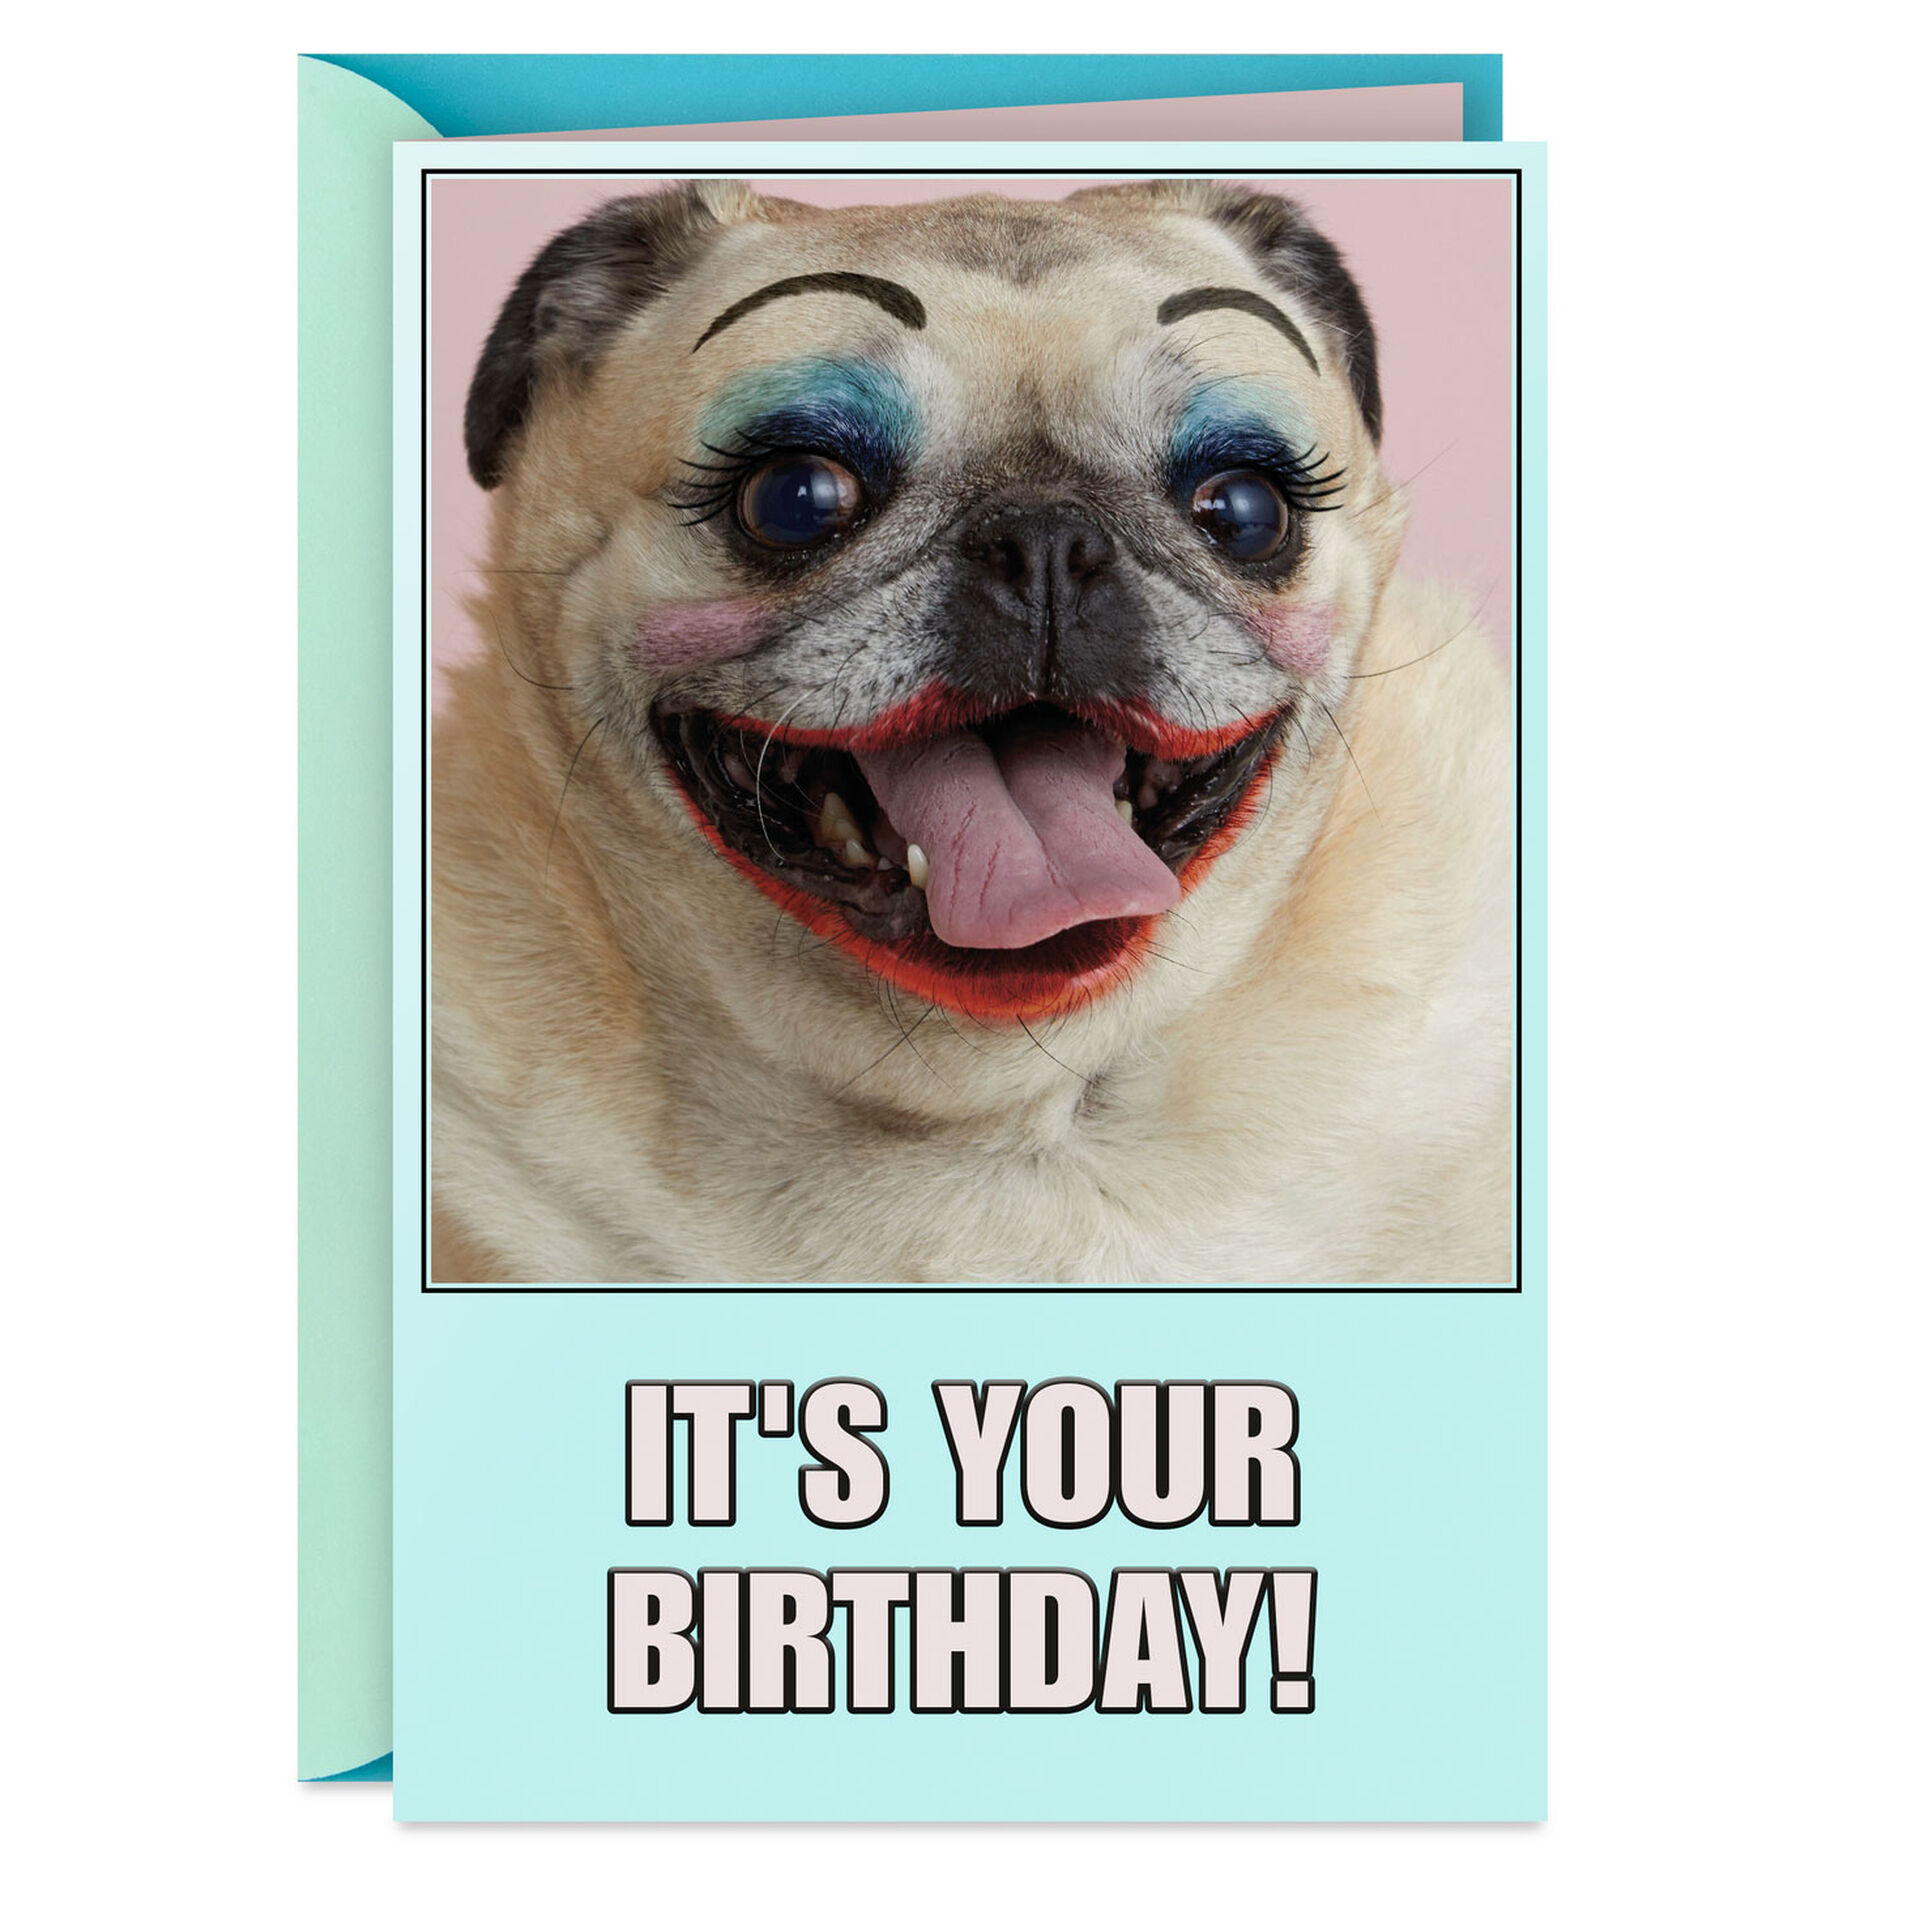 Pug-Dog-With-Makeup-Funny-Birthday-Card-for-Her_299HBD3863_01